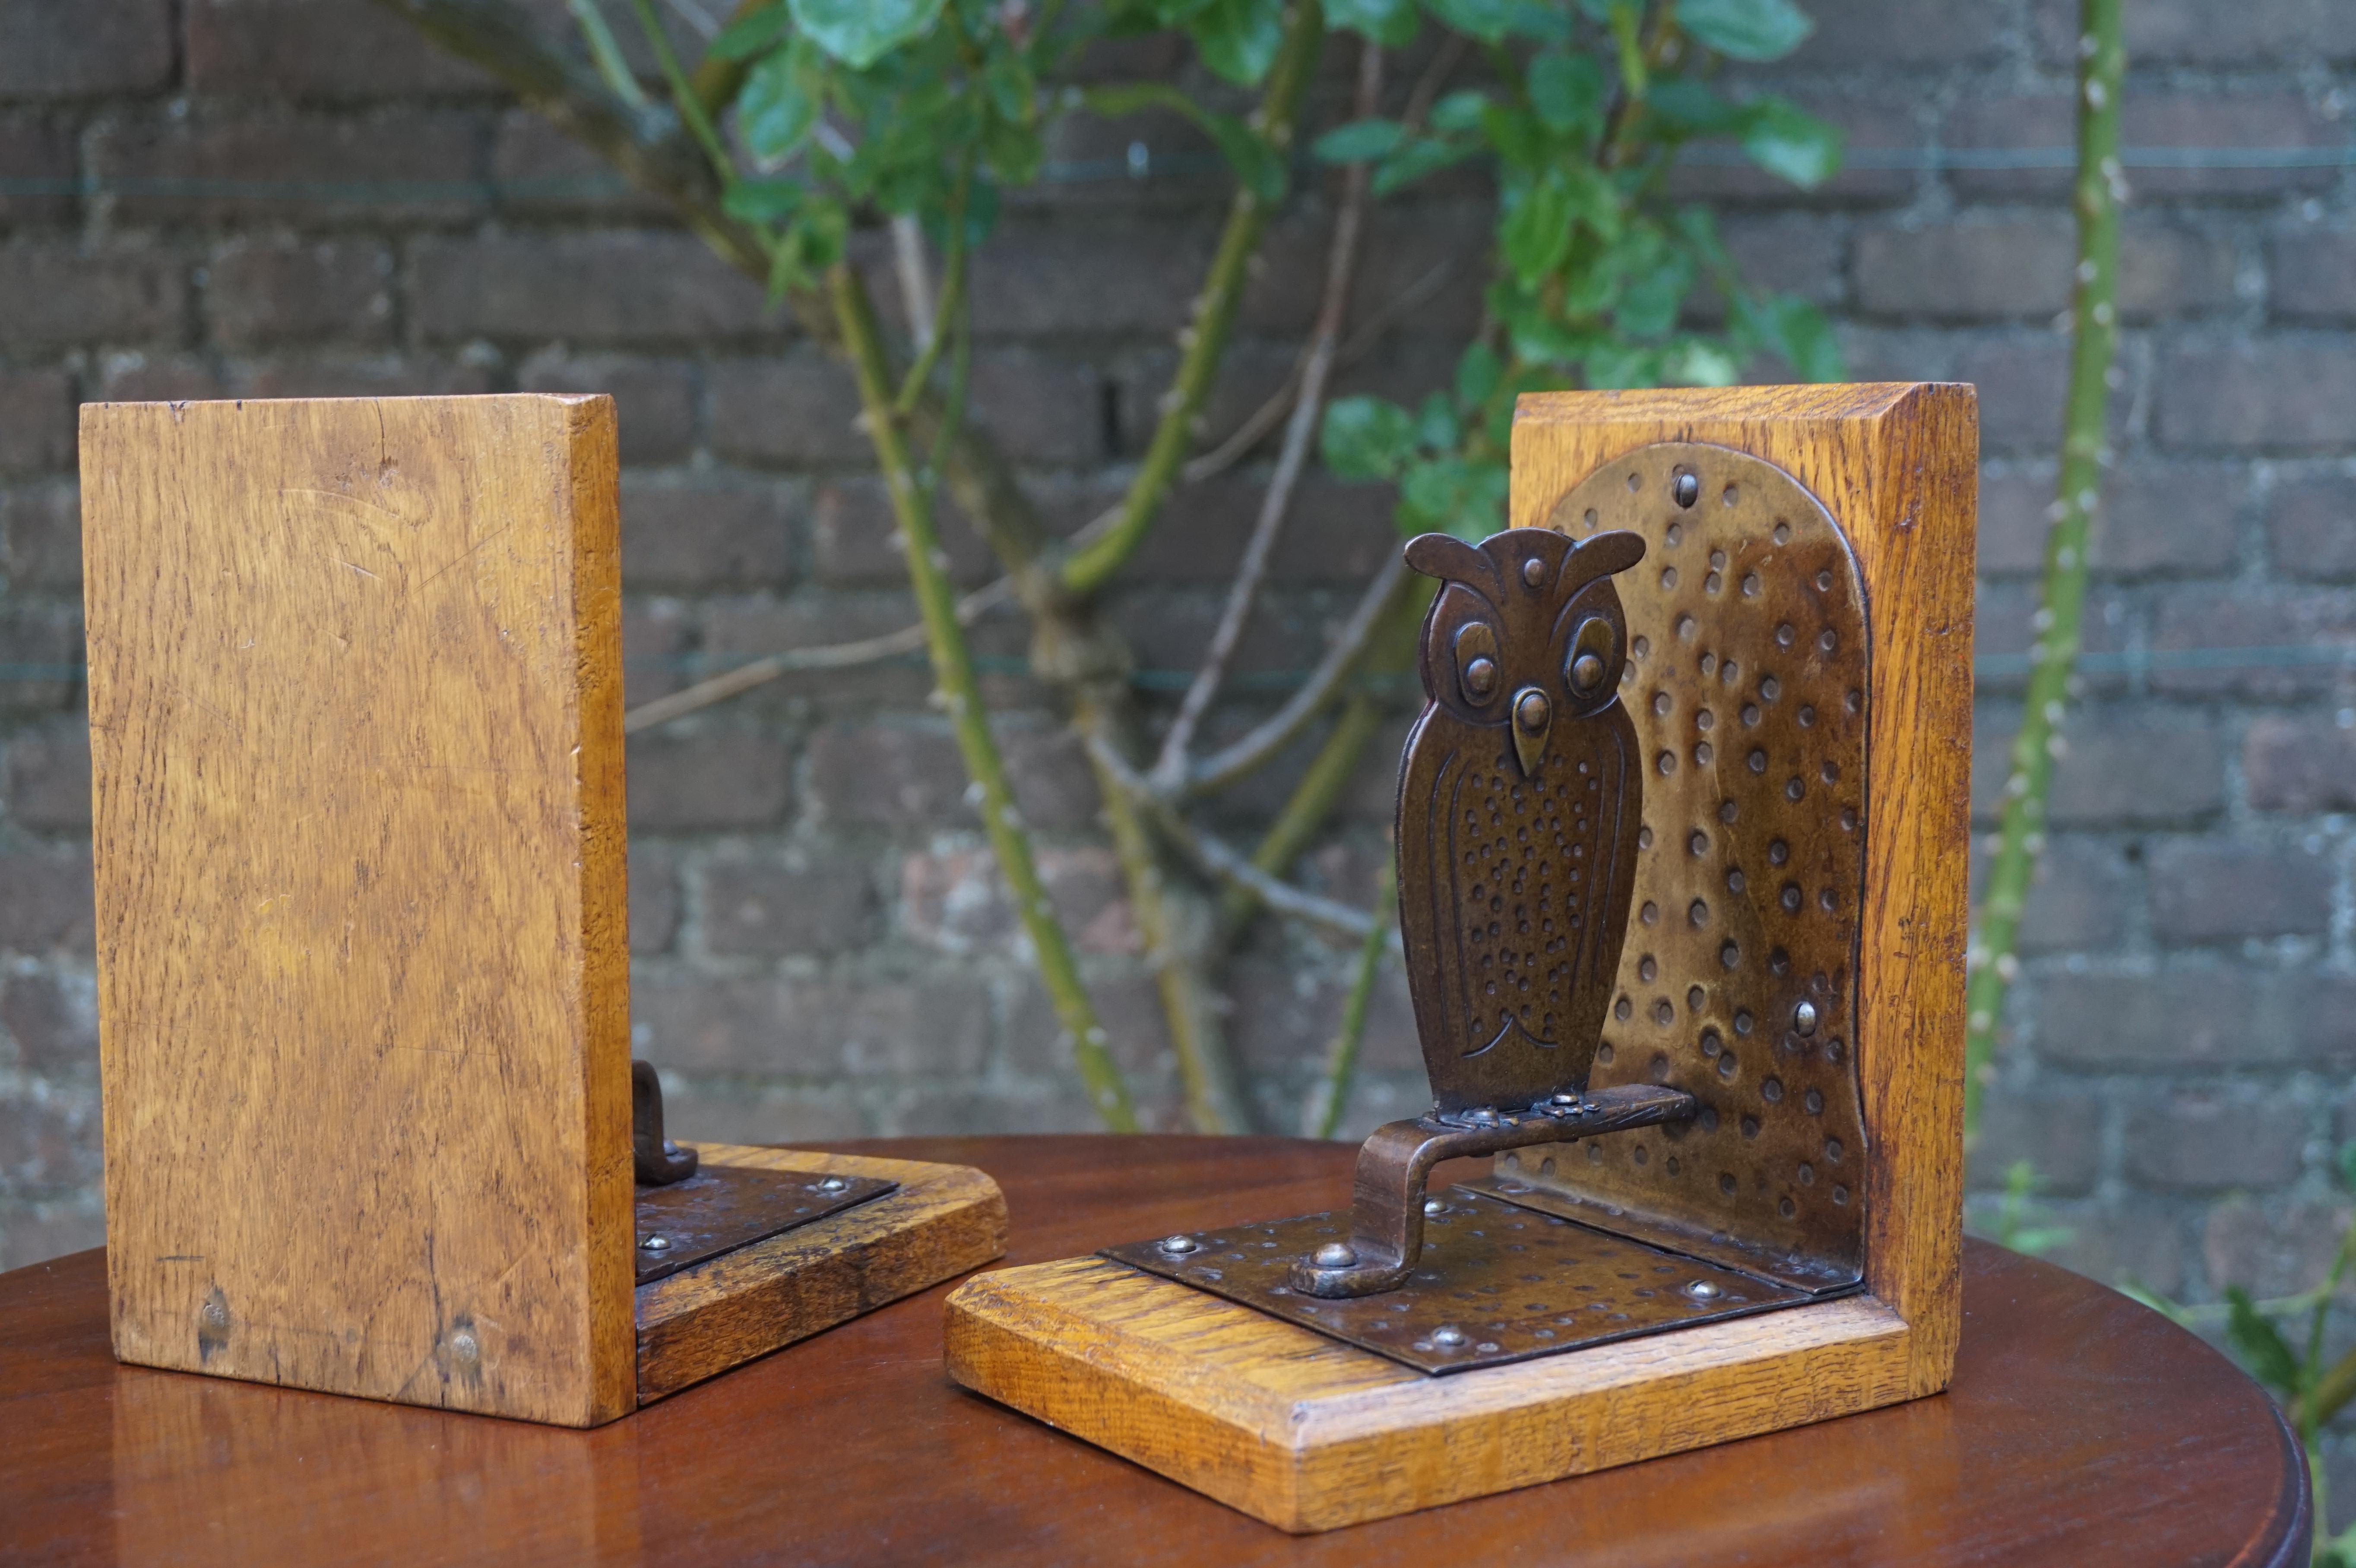 Pair of Hand Hammered Arts & Crafts Metal Owl Bookends by Goberg, Hugo Berger 8